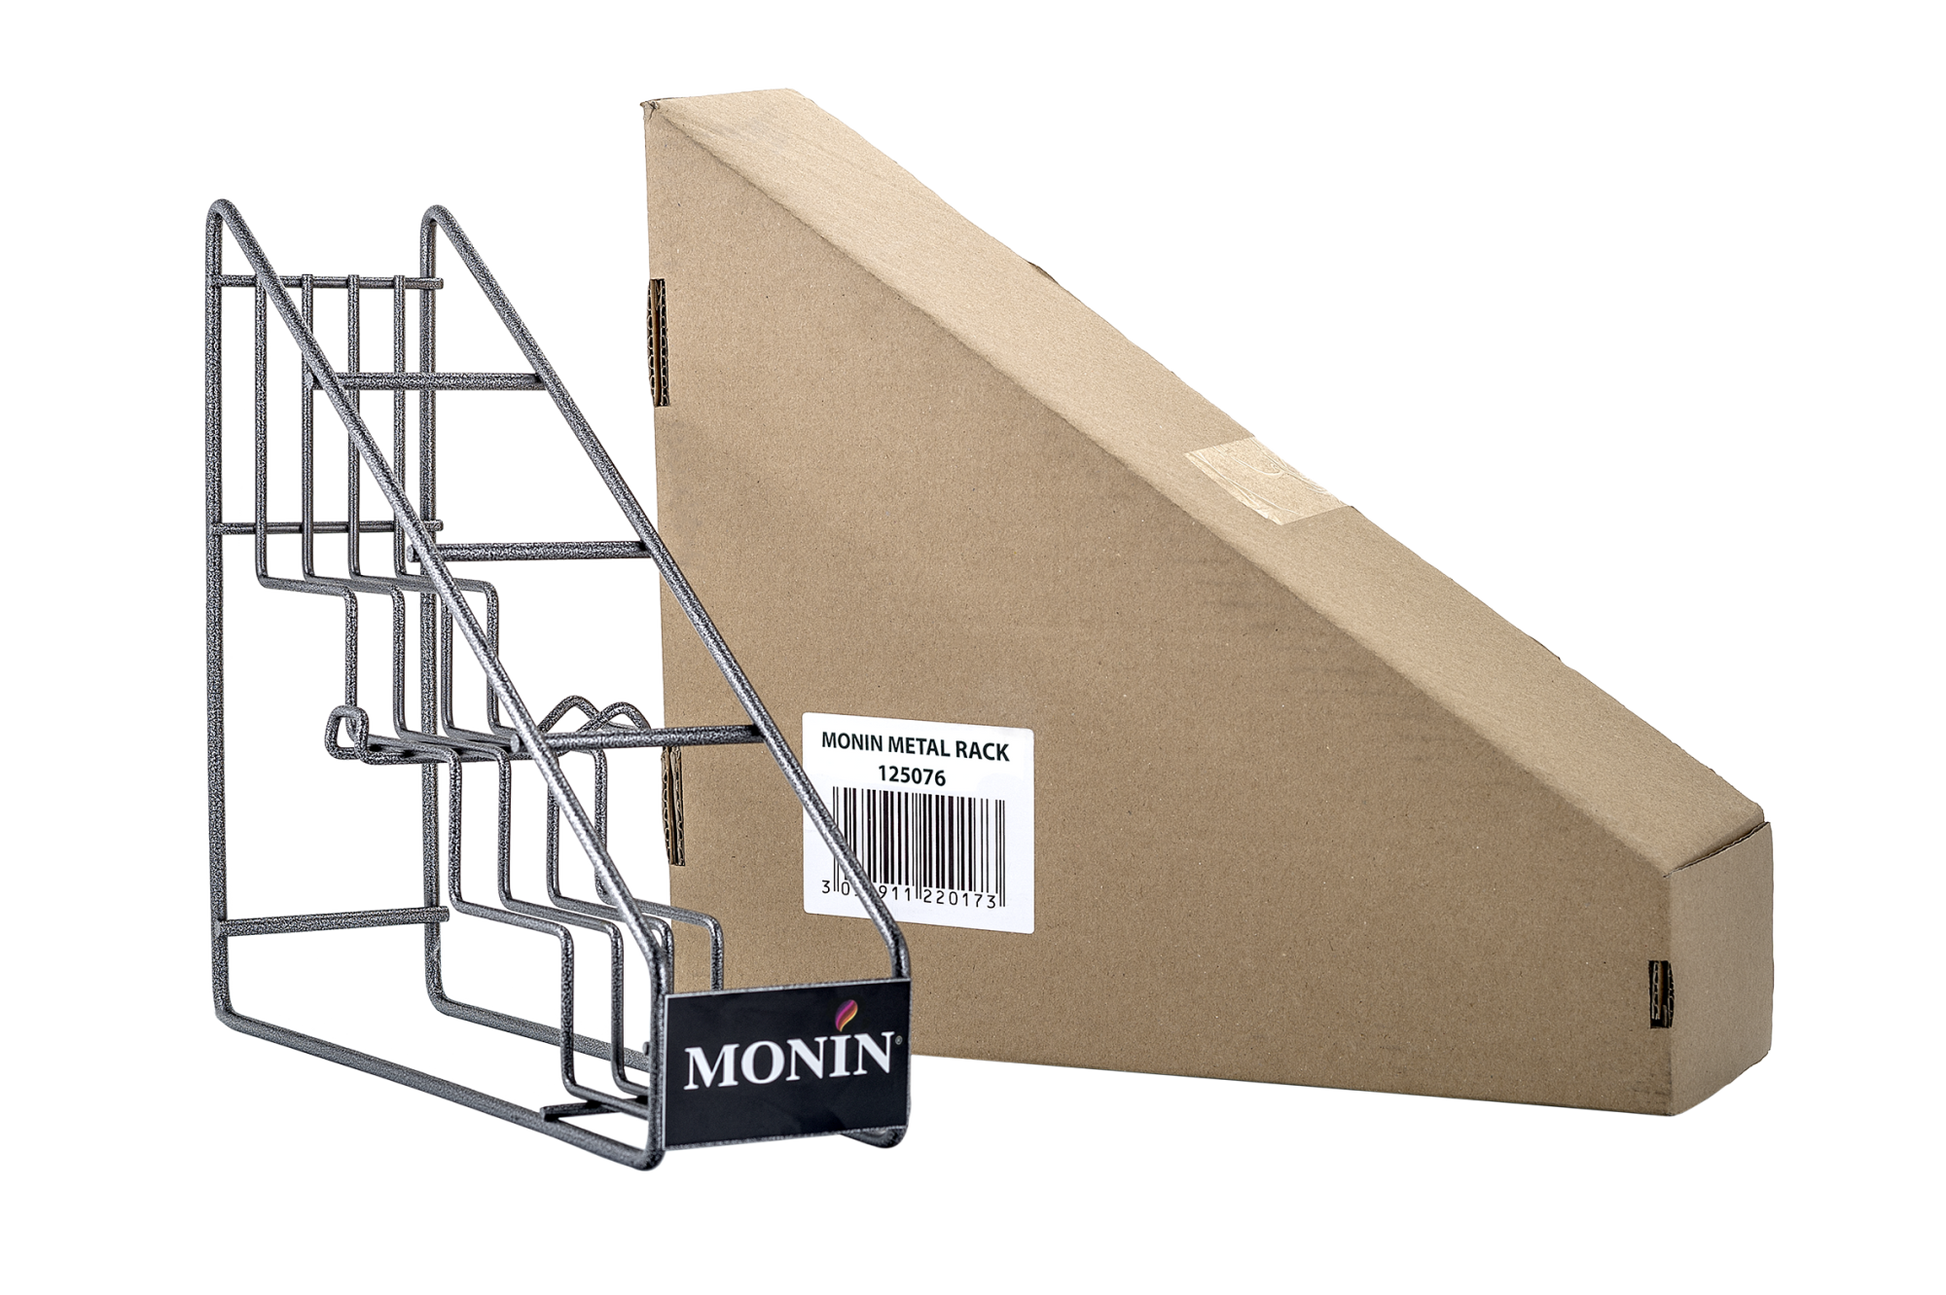 Buy MONIN Bottle Rack. Its Display up to 4 bottles of syrups on this stand for easy, smart storage (bottles not included).